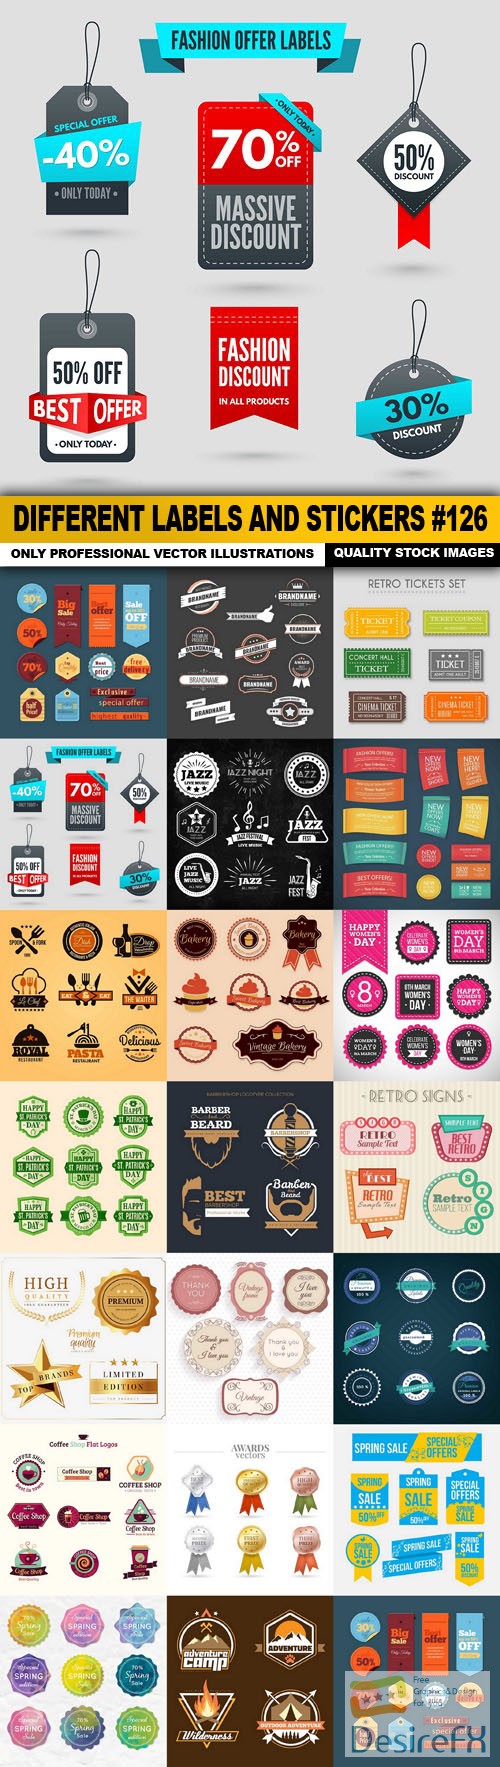 Different Labels And Stickers #126 - 20 Vector